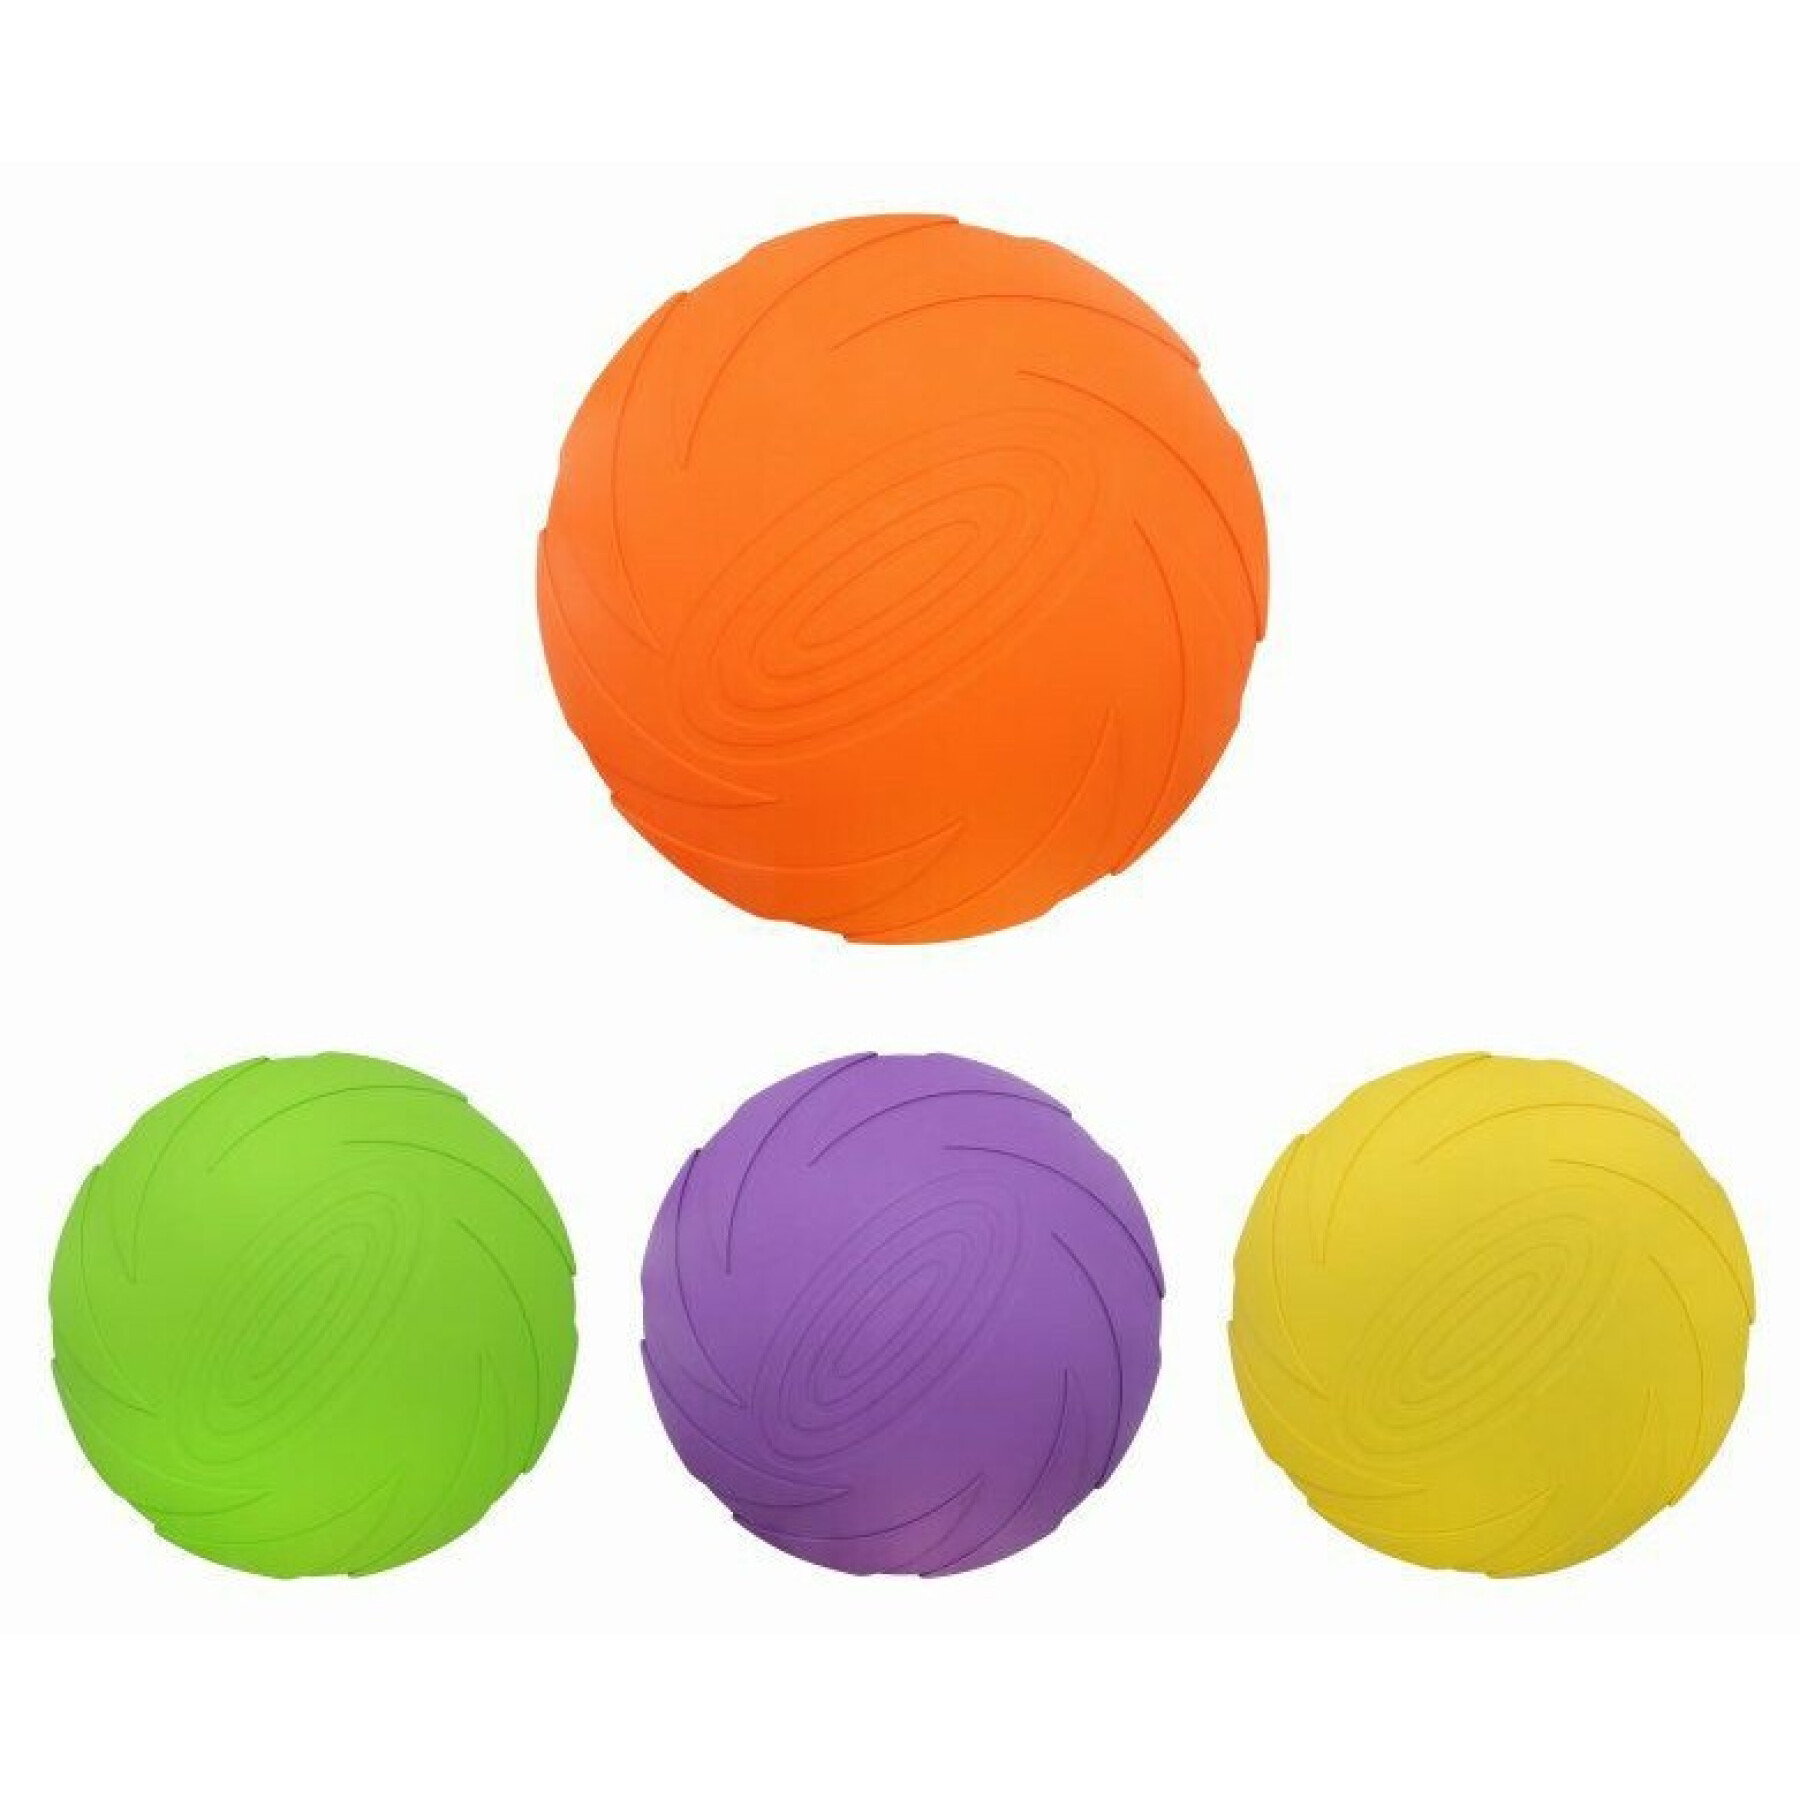 Floating rubber disc dog toy without the words "dog-o-soar". BUBU Pets